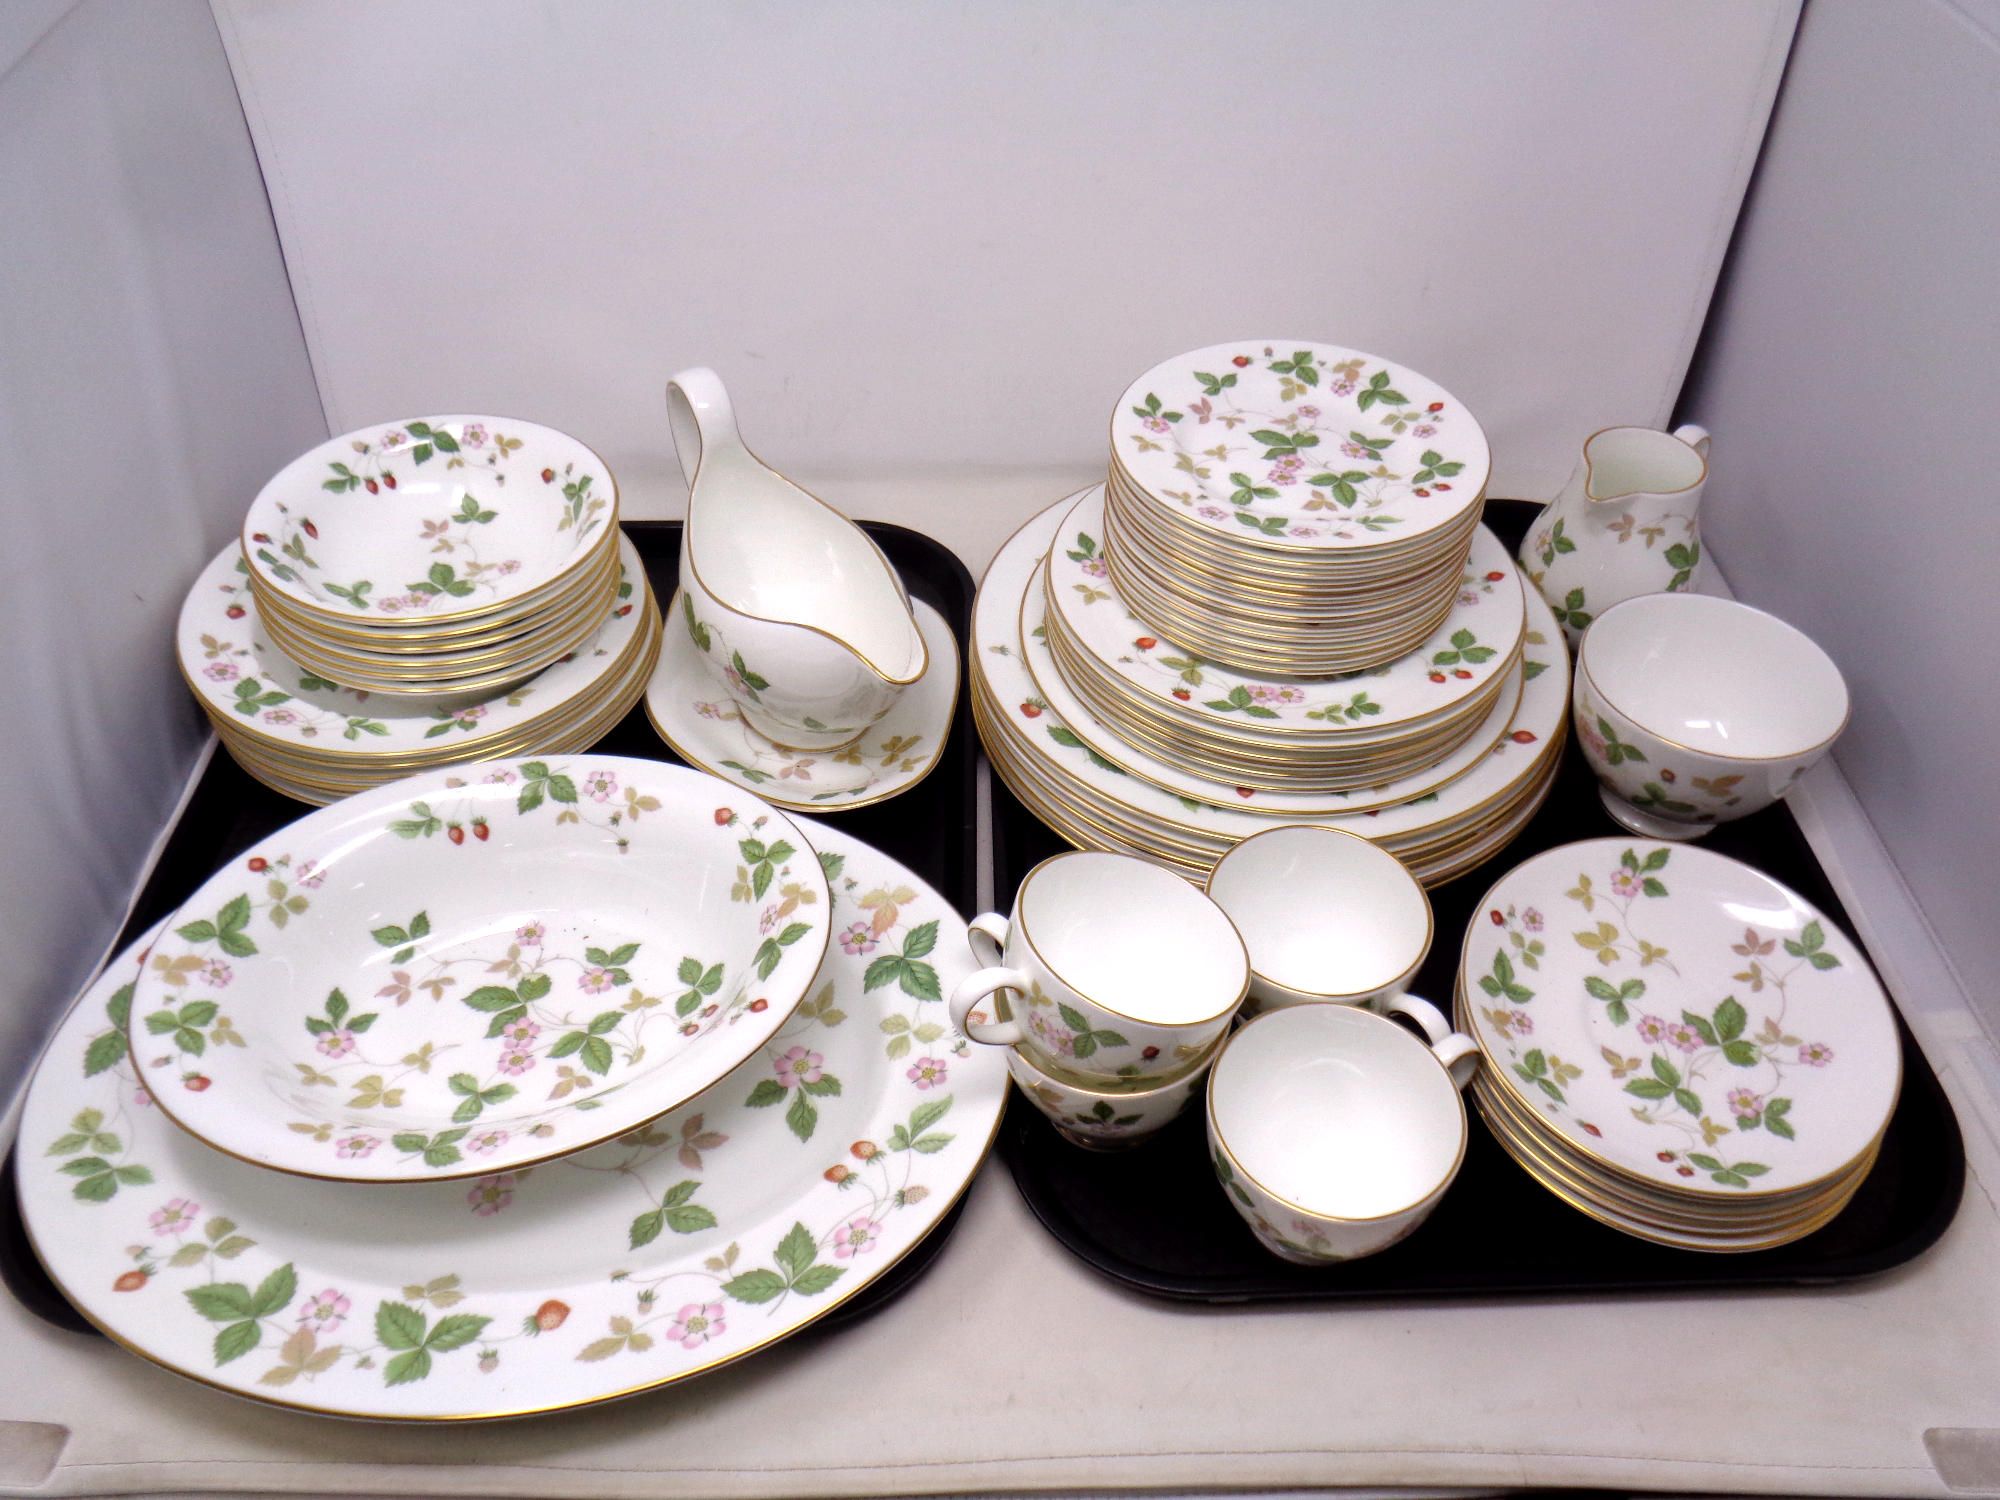 A large quantity of Wedgwood wild strawberry gilded china and dinner plates